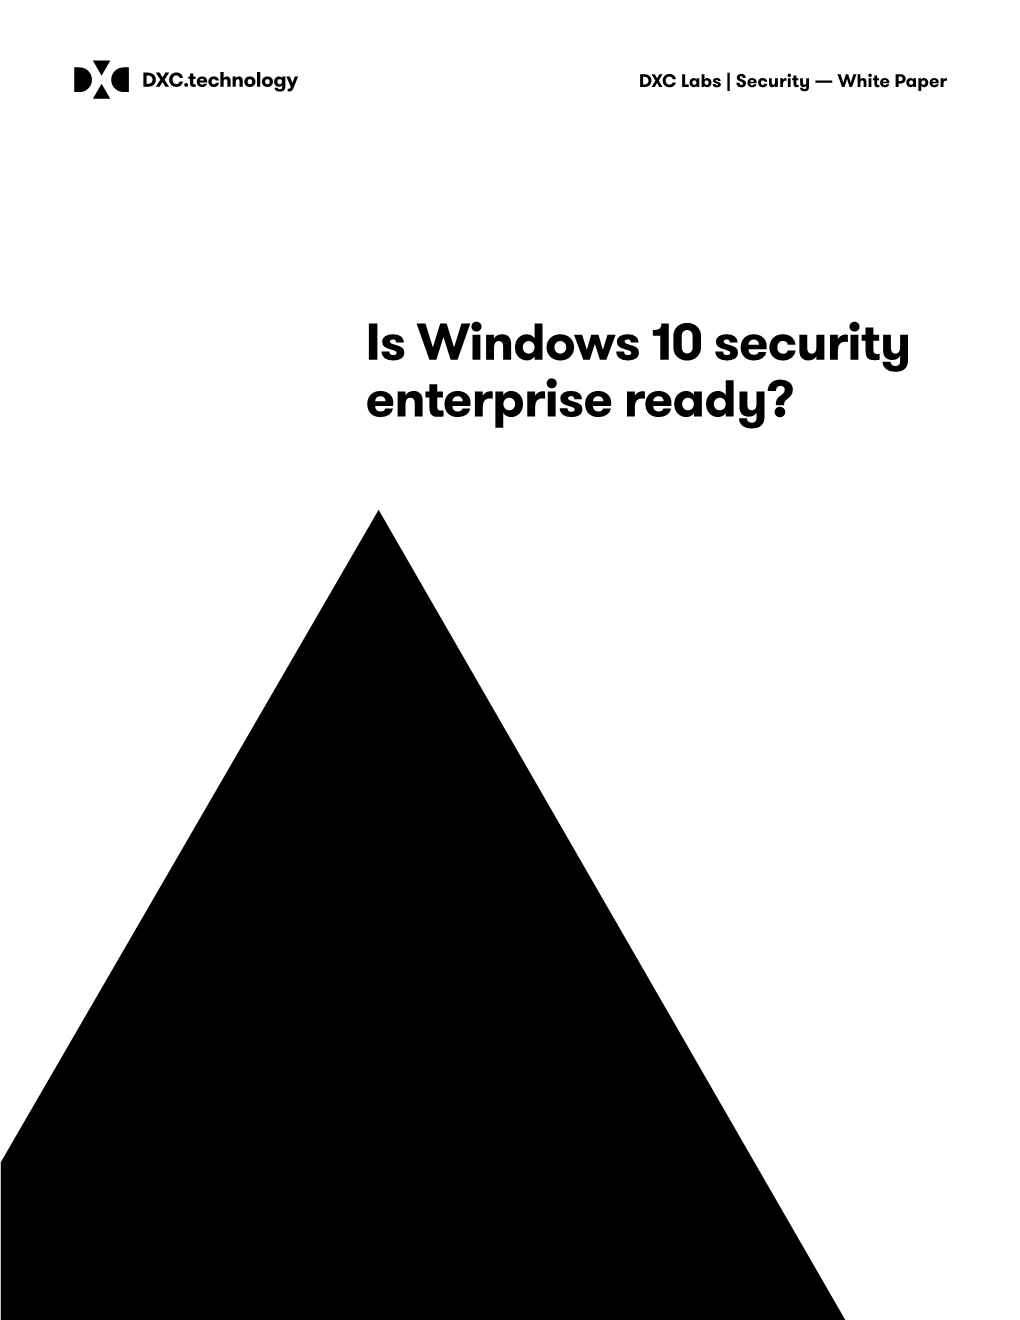 Is Windows 10 Security Enterprise Ready? DXC Labs | Security — White Paper